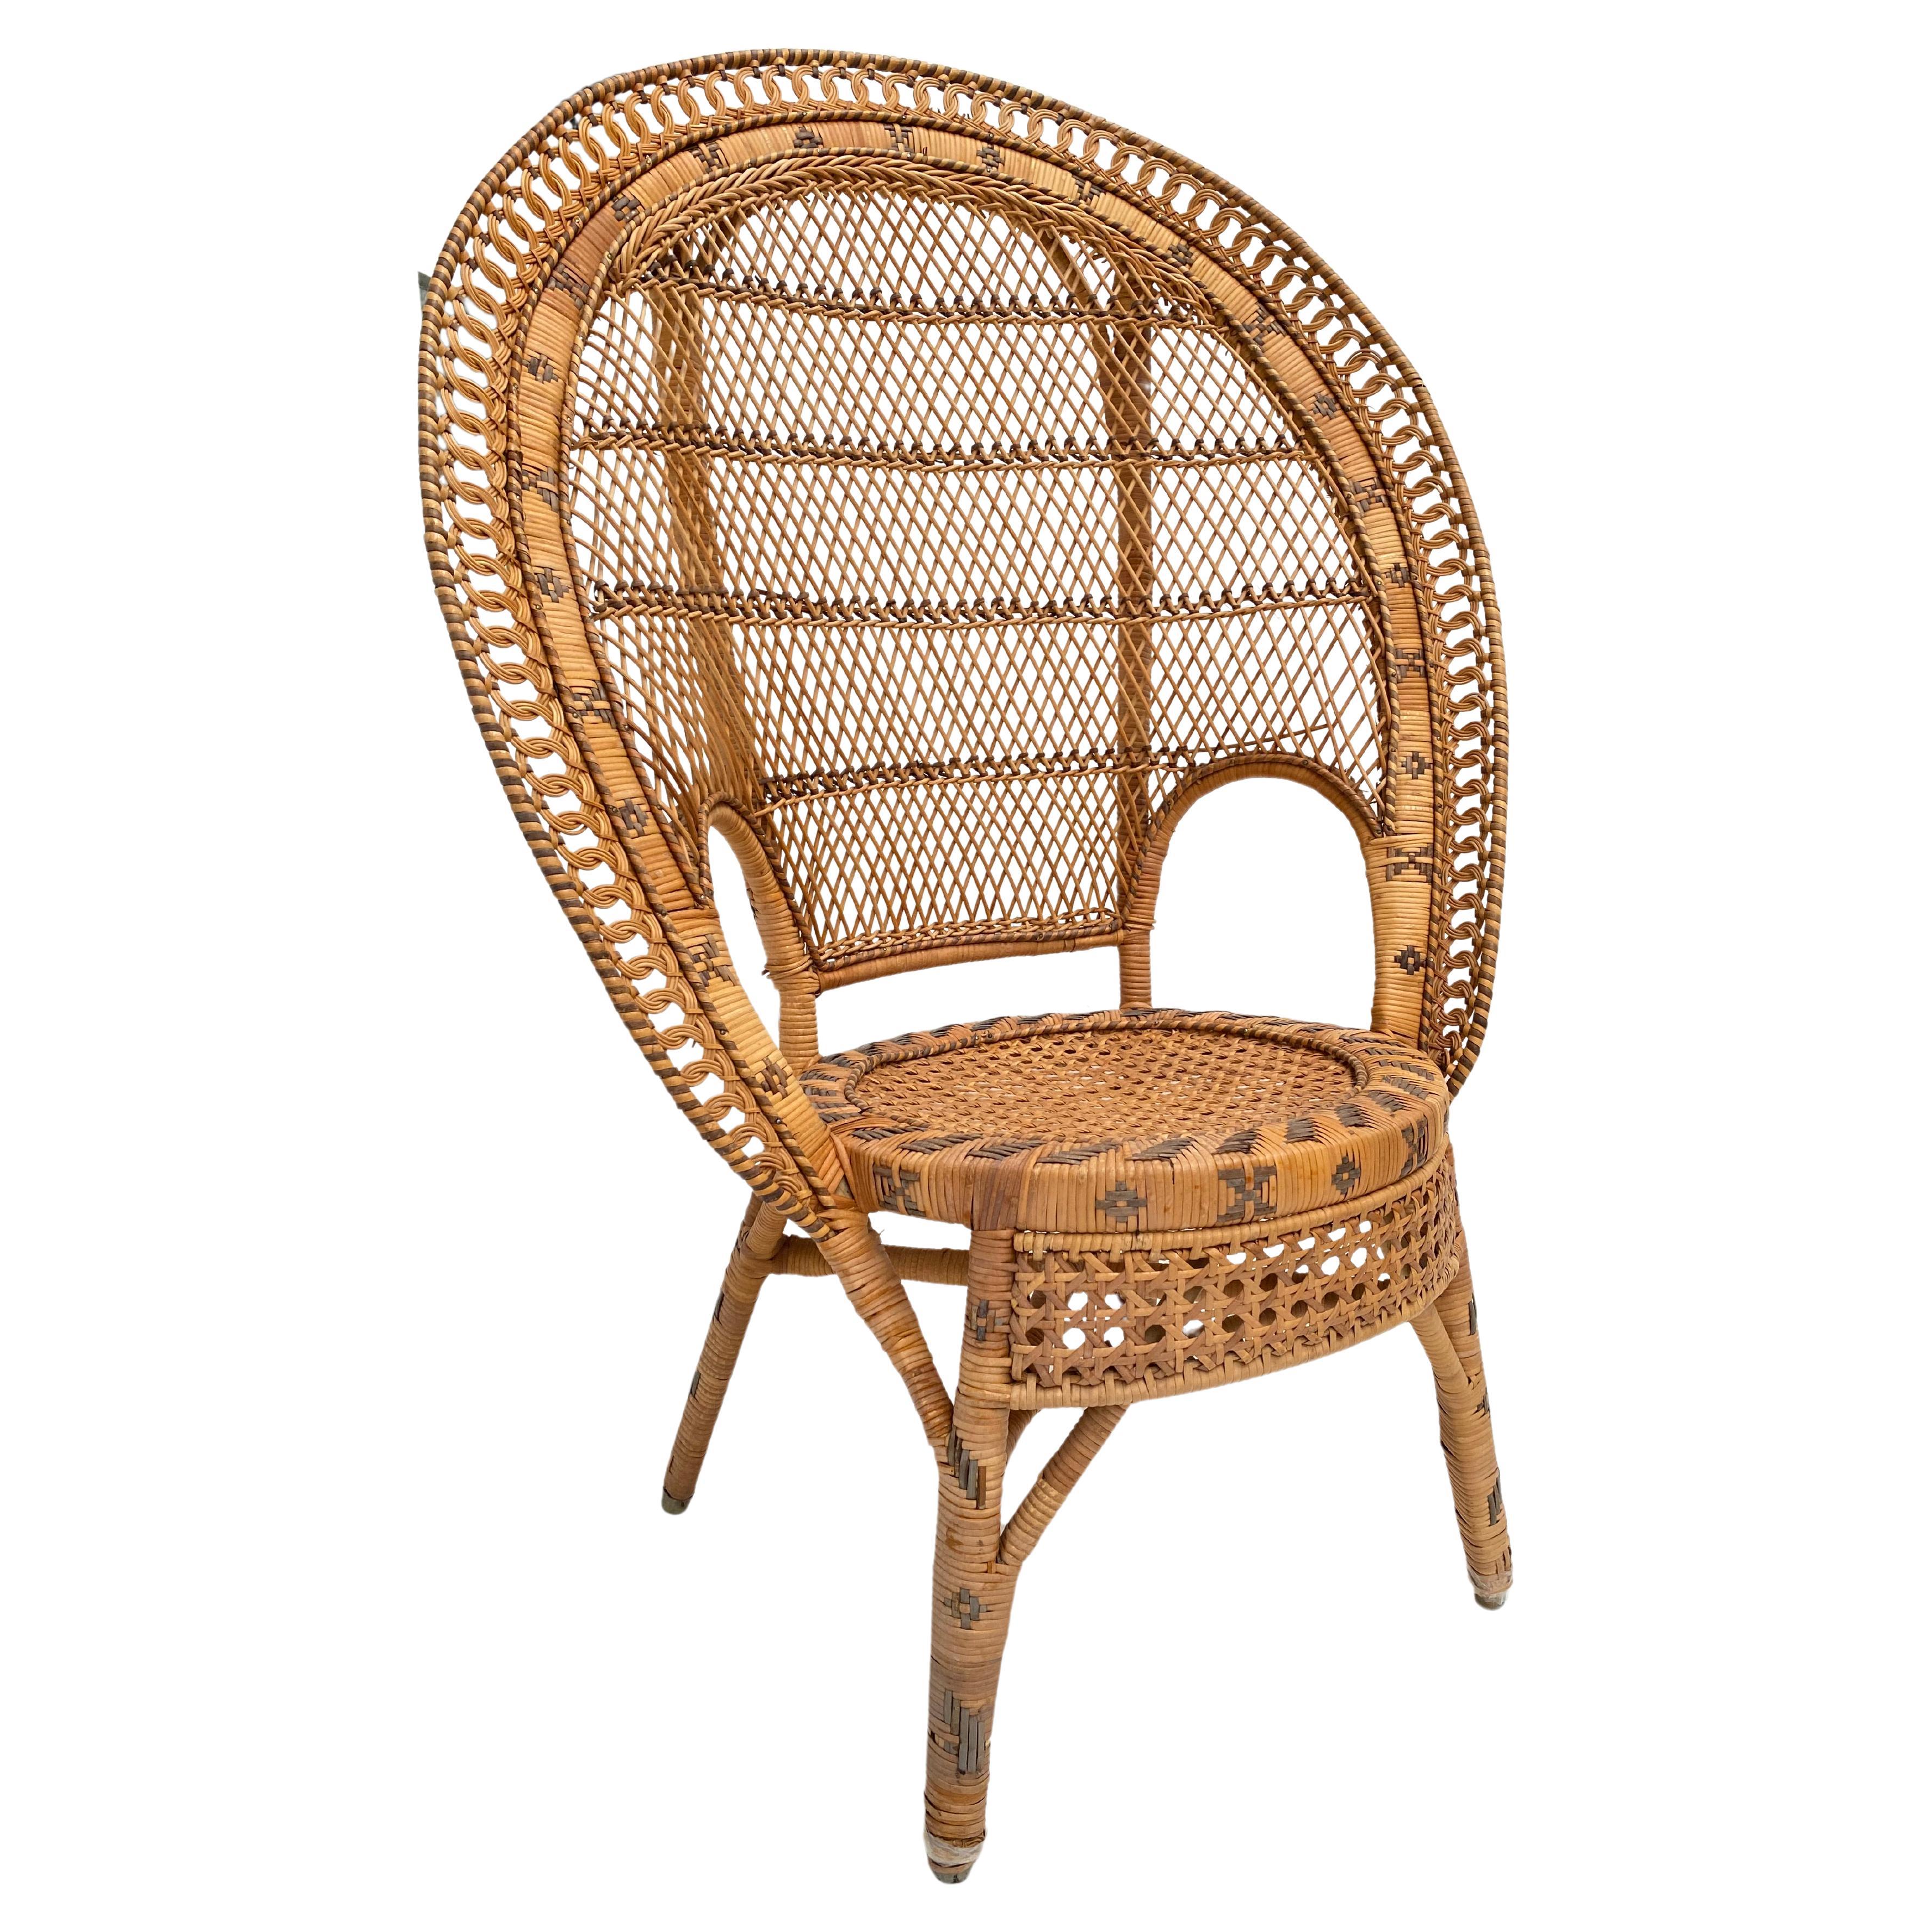 Bohemian 1970's Handwoven Peacock Chair  For Sale